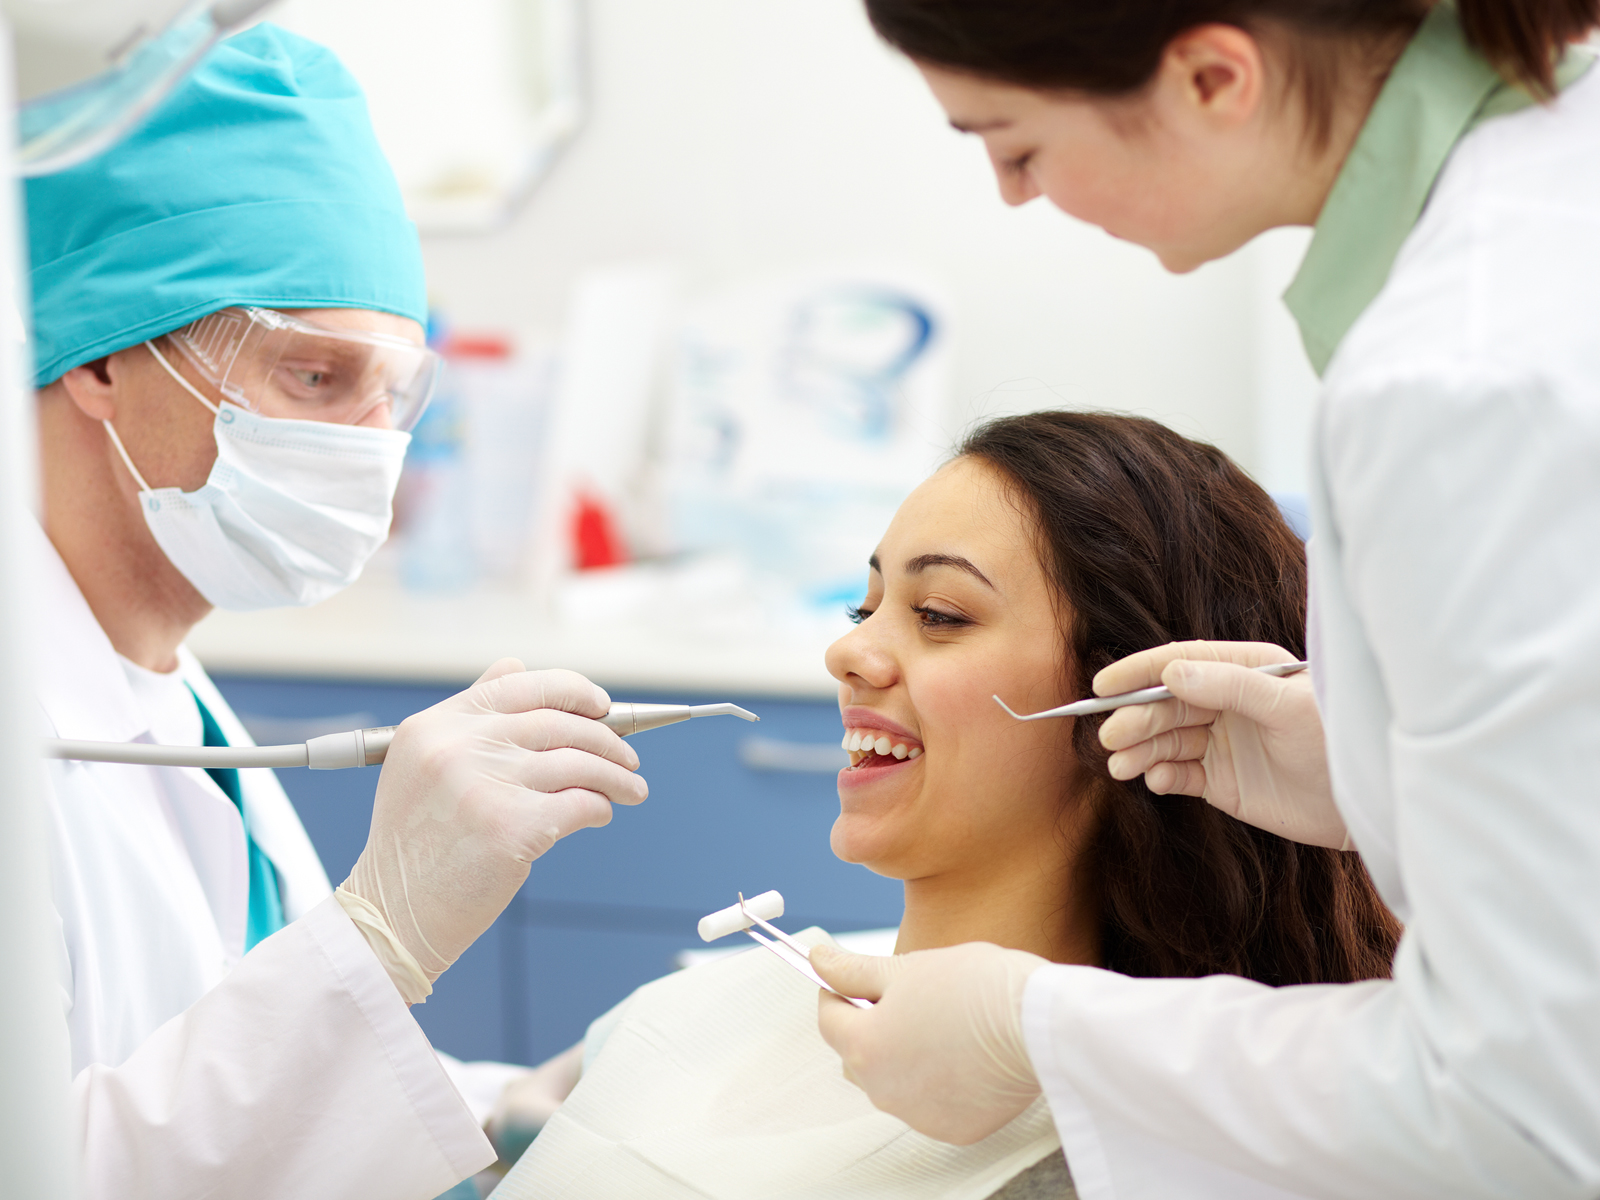 Does it matter if you go to a different dentist each time?